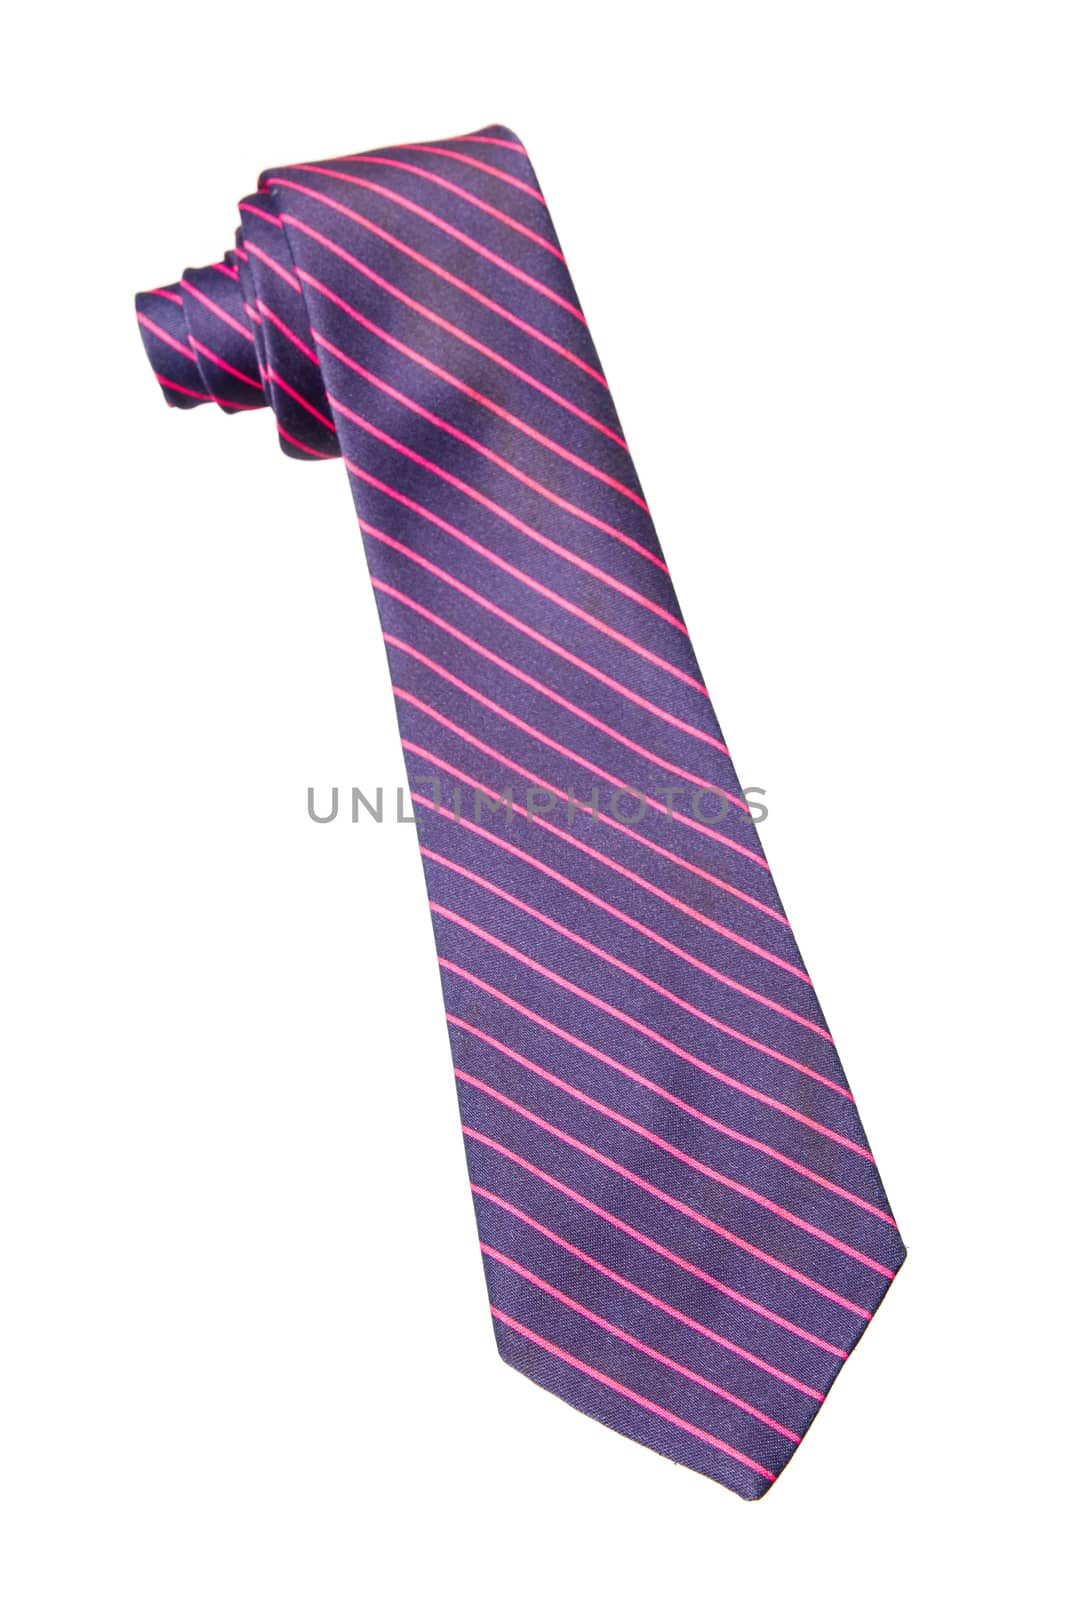 blue and pink strips business neck tie isolated on white background